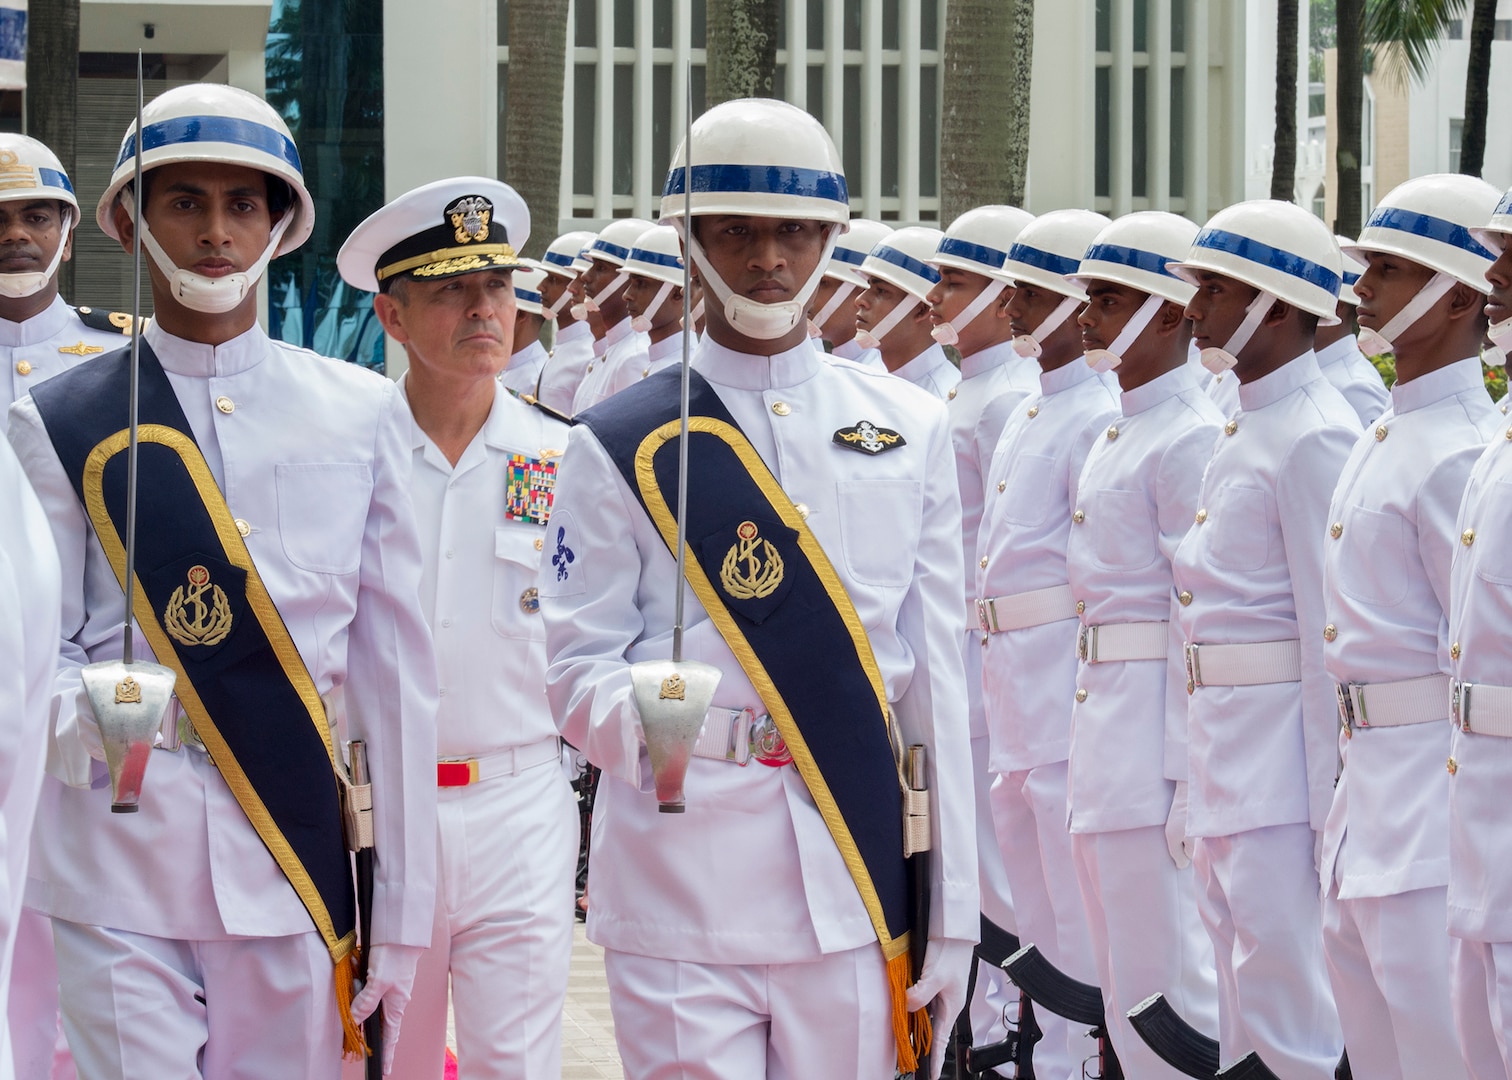 170709-N-WY954-310 DHAKA, BANGLADESH (July 9, 2017) – Adm. Harry Harris, Commander U.S. Pacific Command (PACOM), participates in an honors ceremony conducted at the Bangladesh Navy Headquarters. This is Harris’ first visit to Bangladesh as PACOM commander. During the visit he met with counterparts and government officials for discussions on military cooperation and regional security initiatives in the Indo-Asia Pacific. (U.S. Navy photo by Mass Communications Specialist 2nd Class Robin W. Peak/ Released)